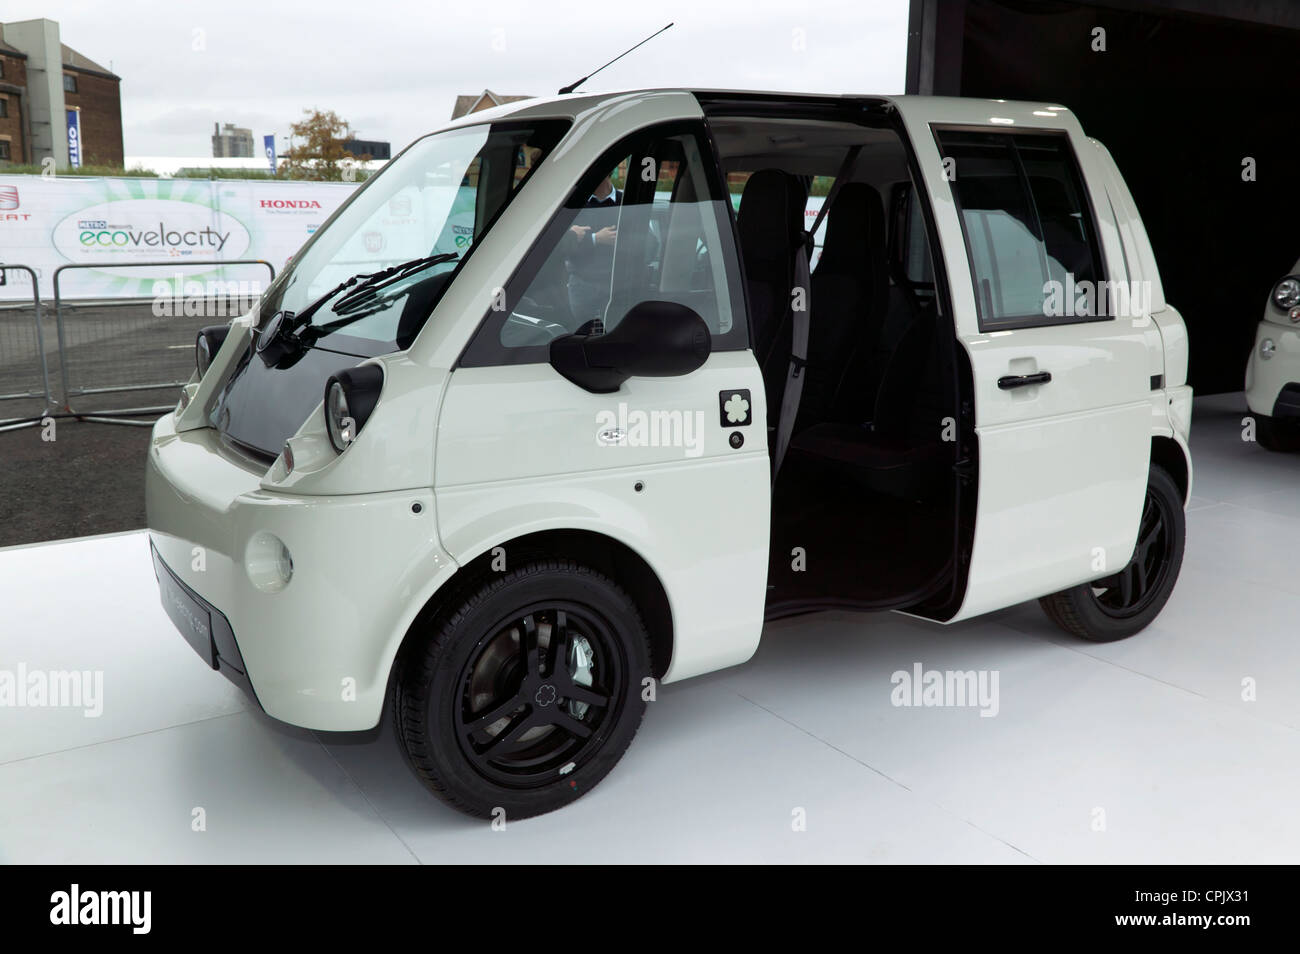 The Mia electric car, on display at ecovelocity, 2011 Stock Photo - Alamy